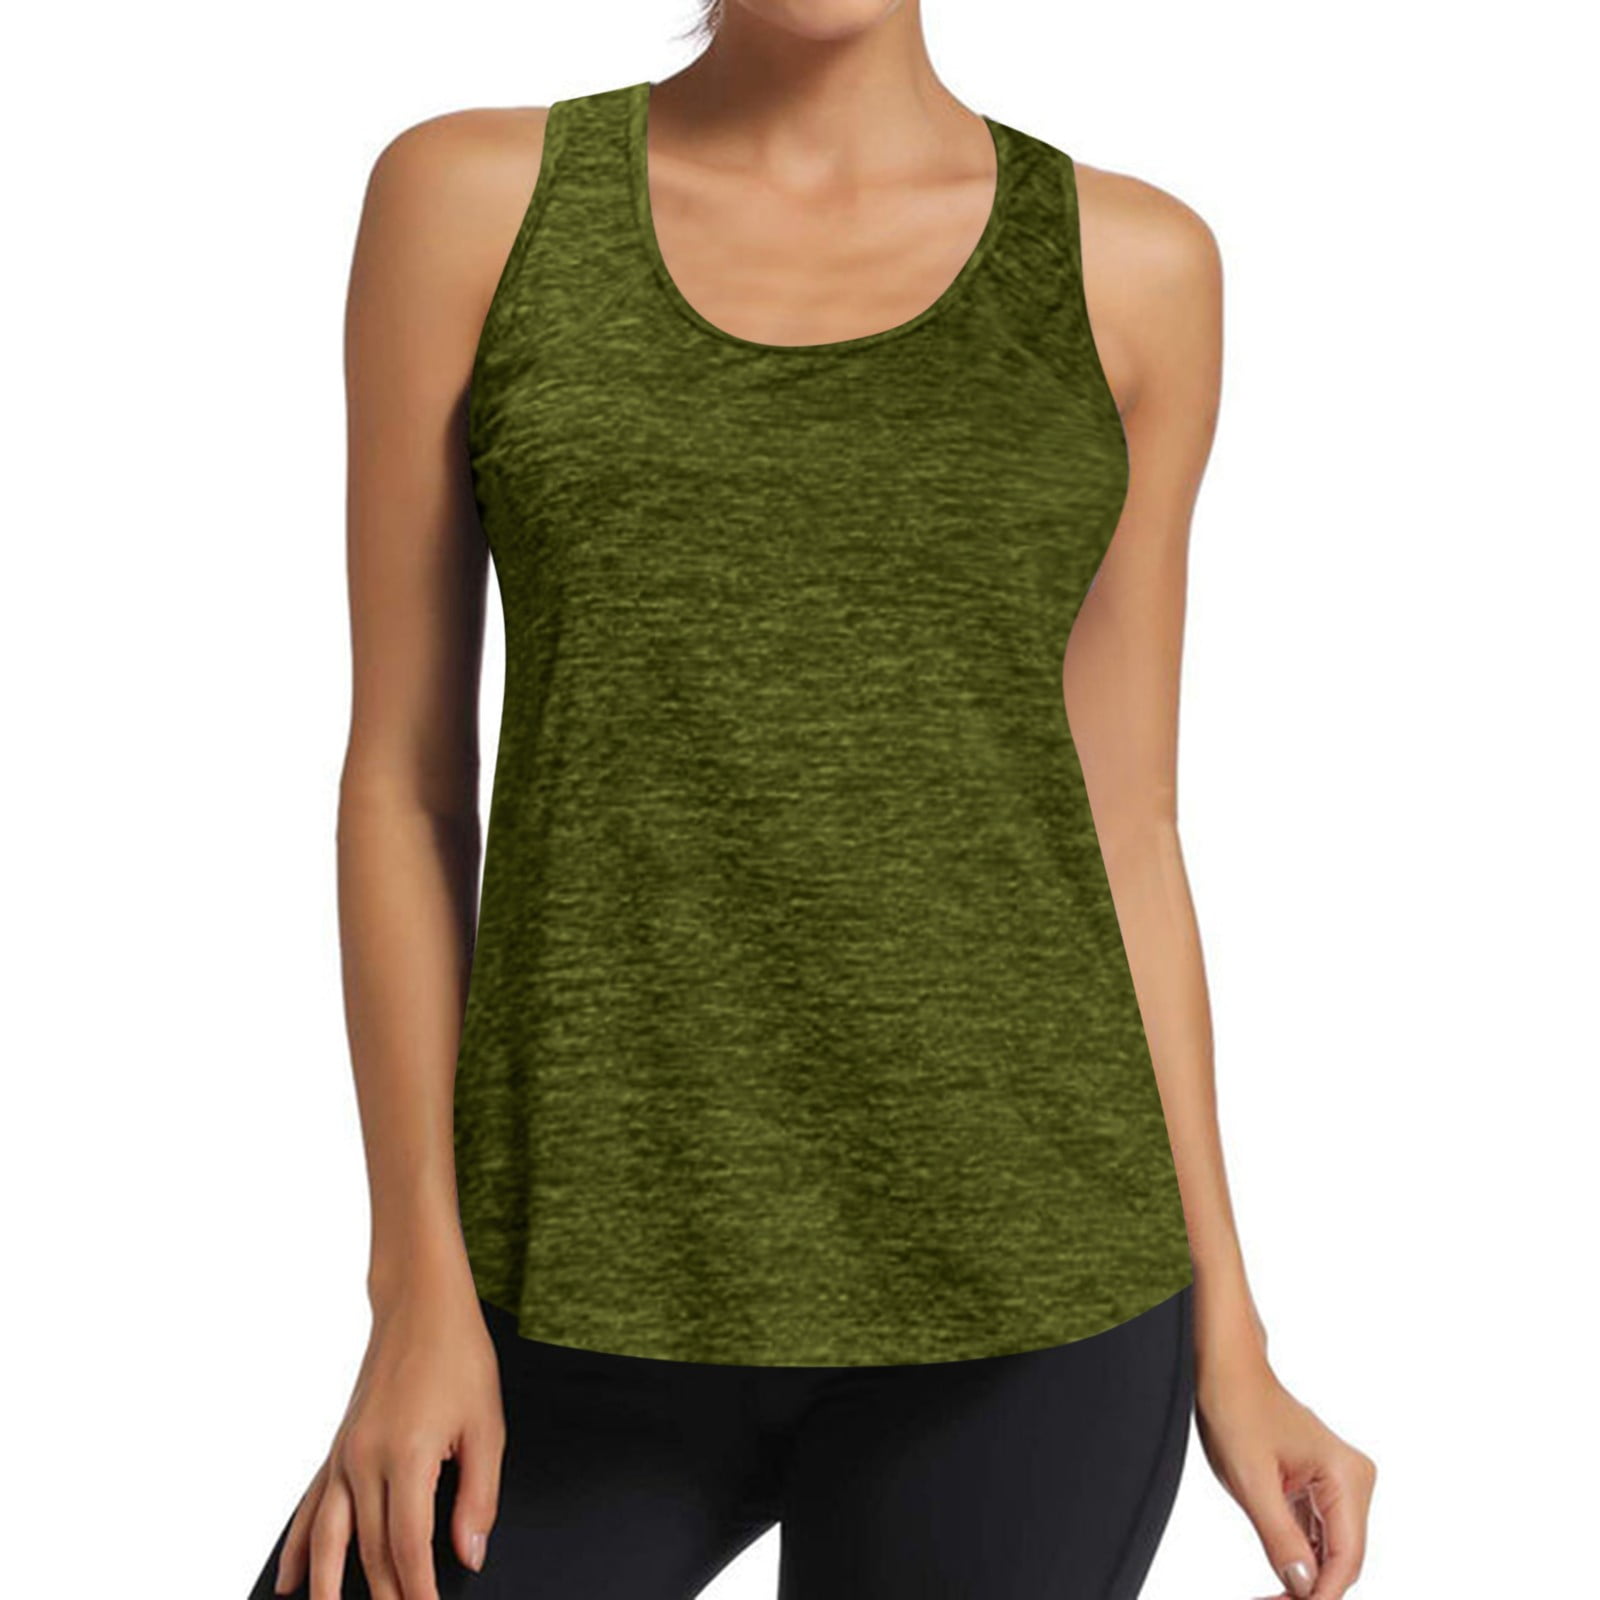  HLXFHB Workout Tank Tops for Women Gym Exercise Athletic Yoga  Tops Racerback Sports Shirts Army Green : Clothing, Shoes & Jewelry